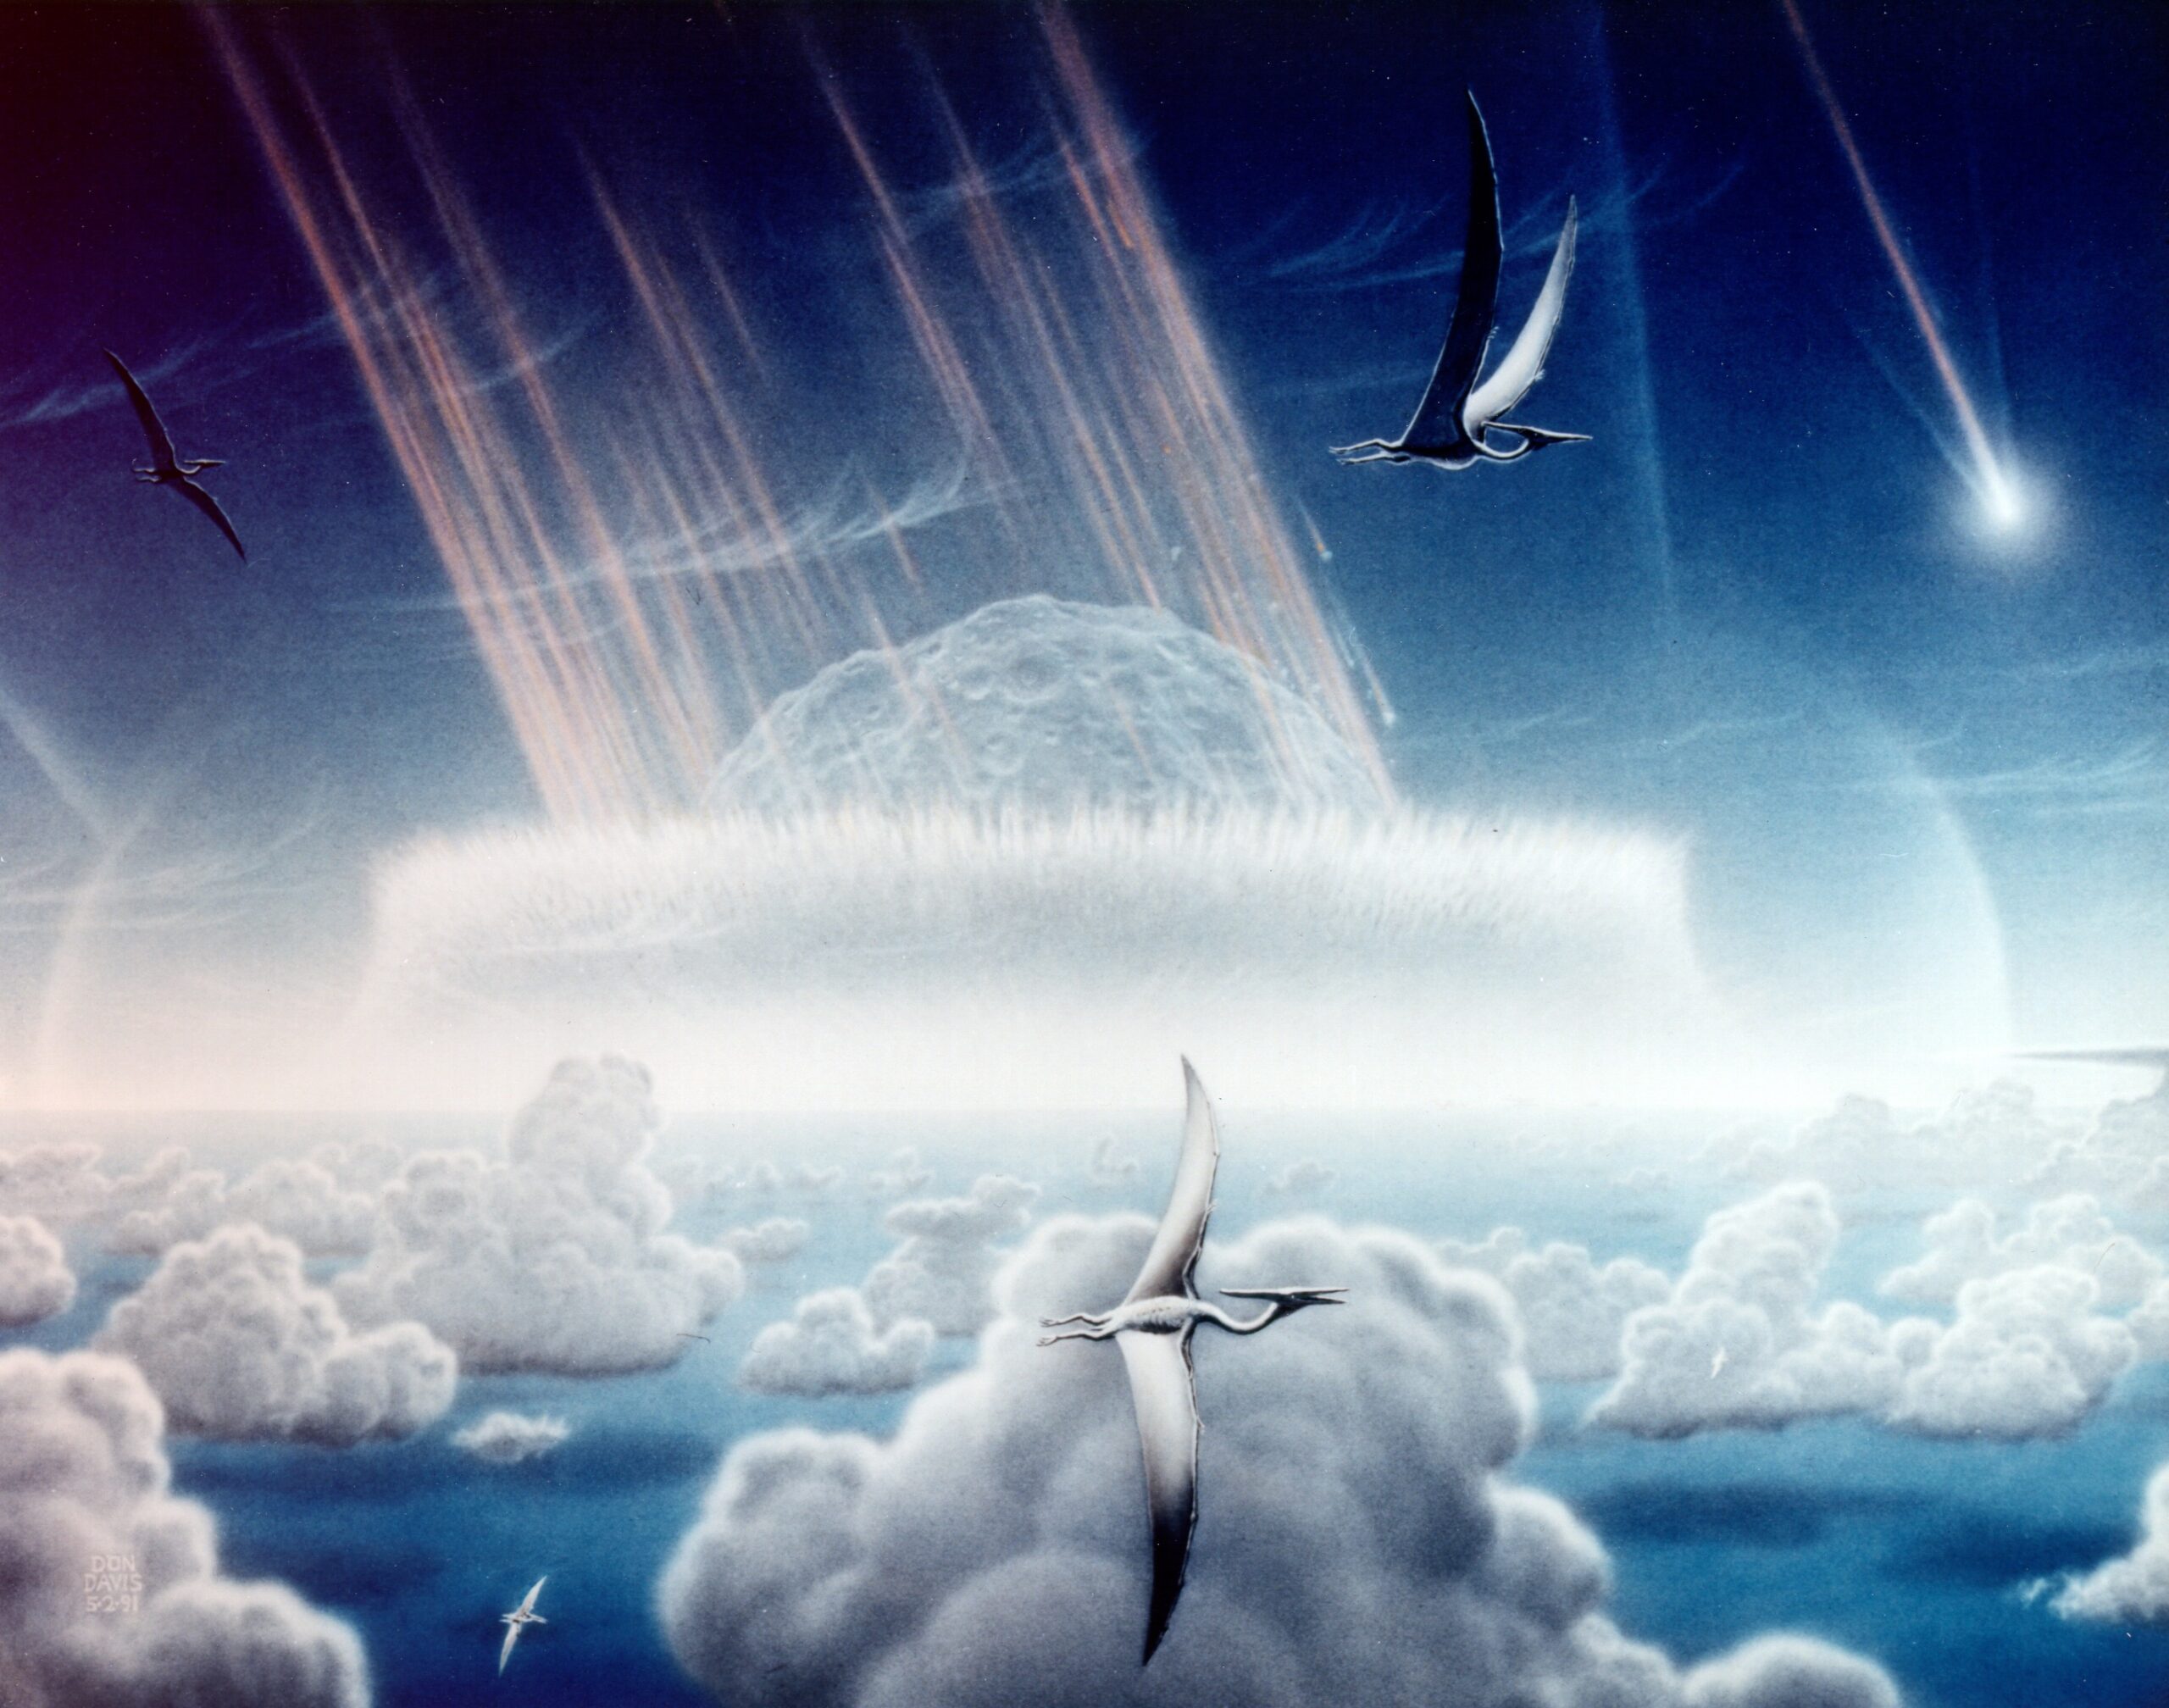 If that asteroid had been 30 seconds late, dinosaurs might rule the world and humans probably wouldn’t exist